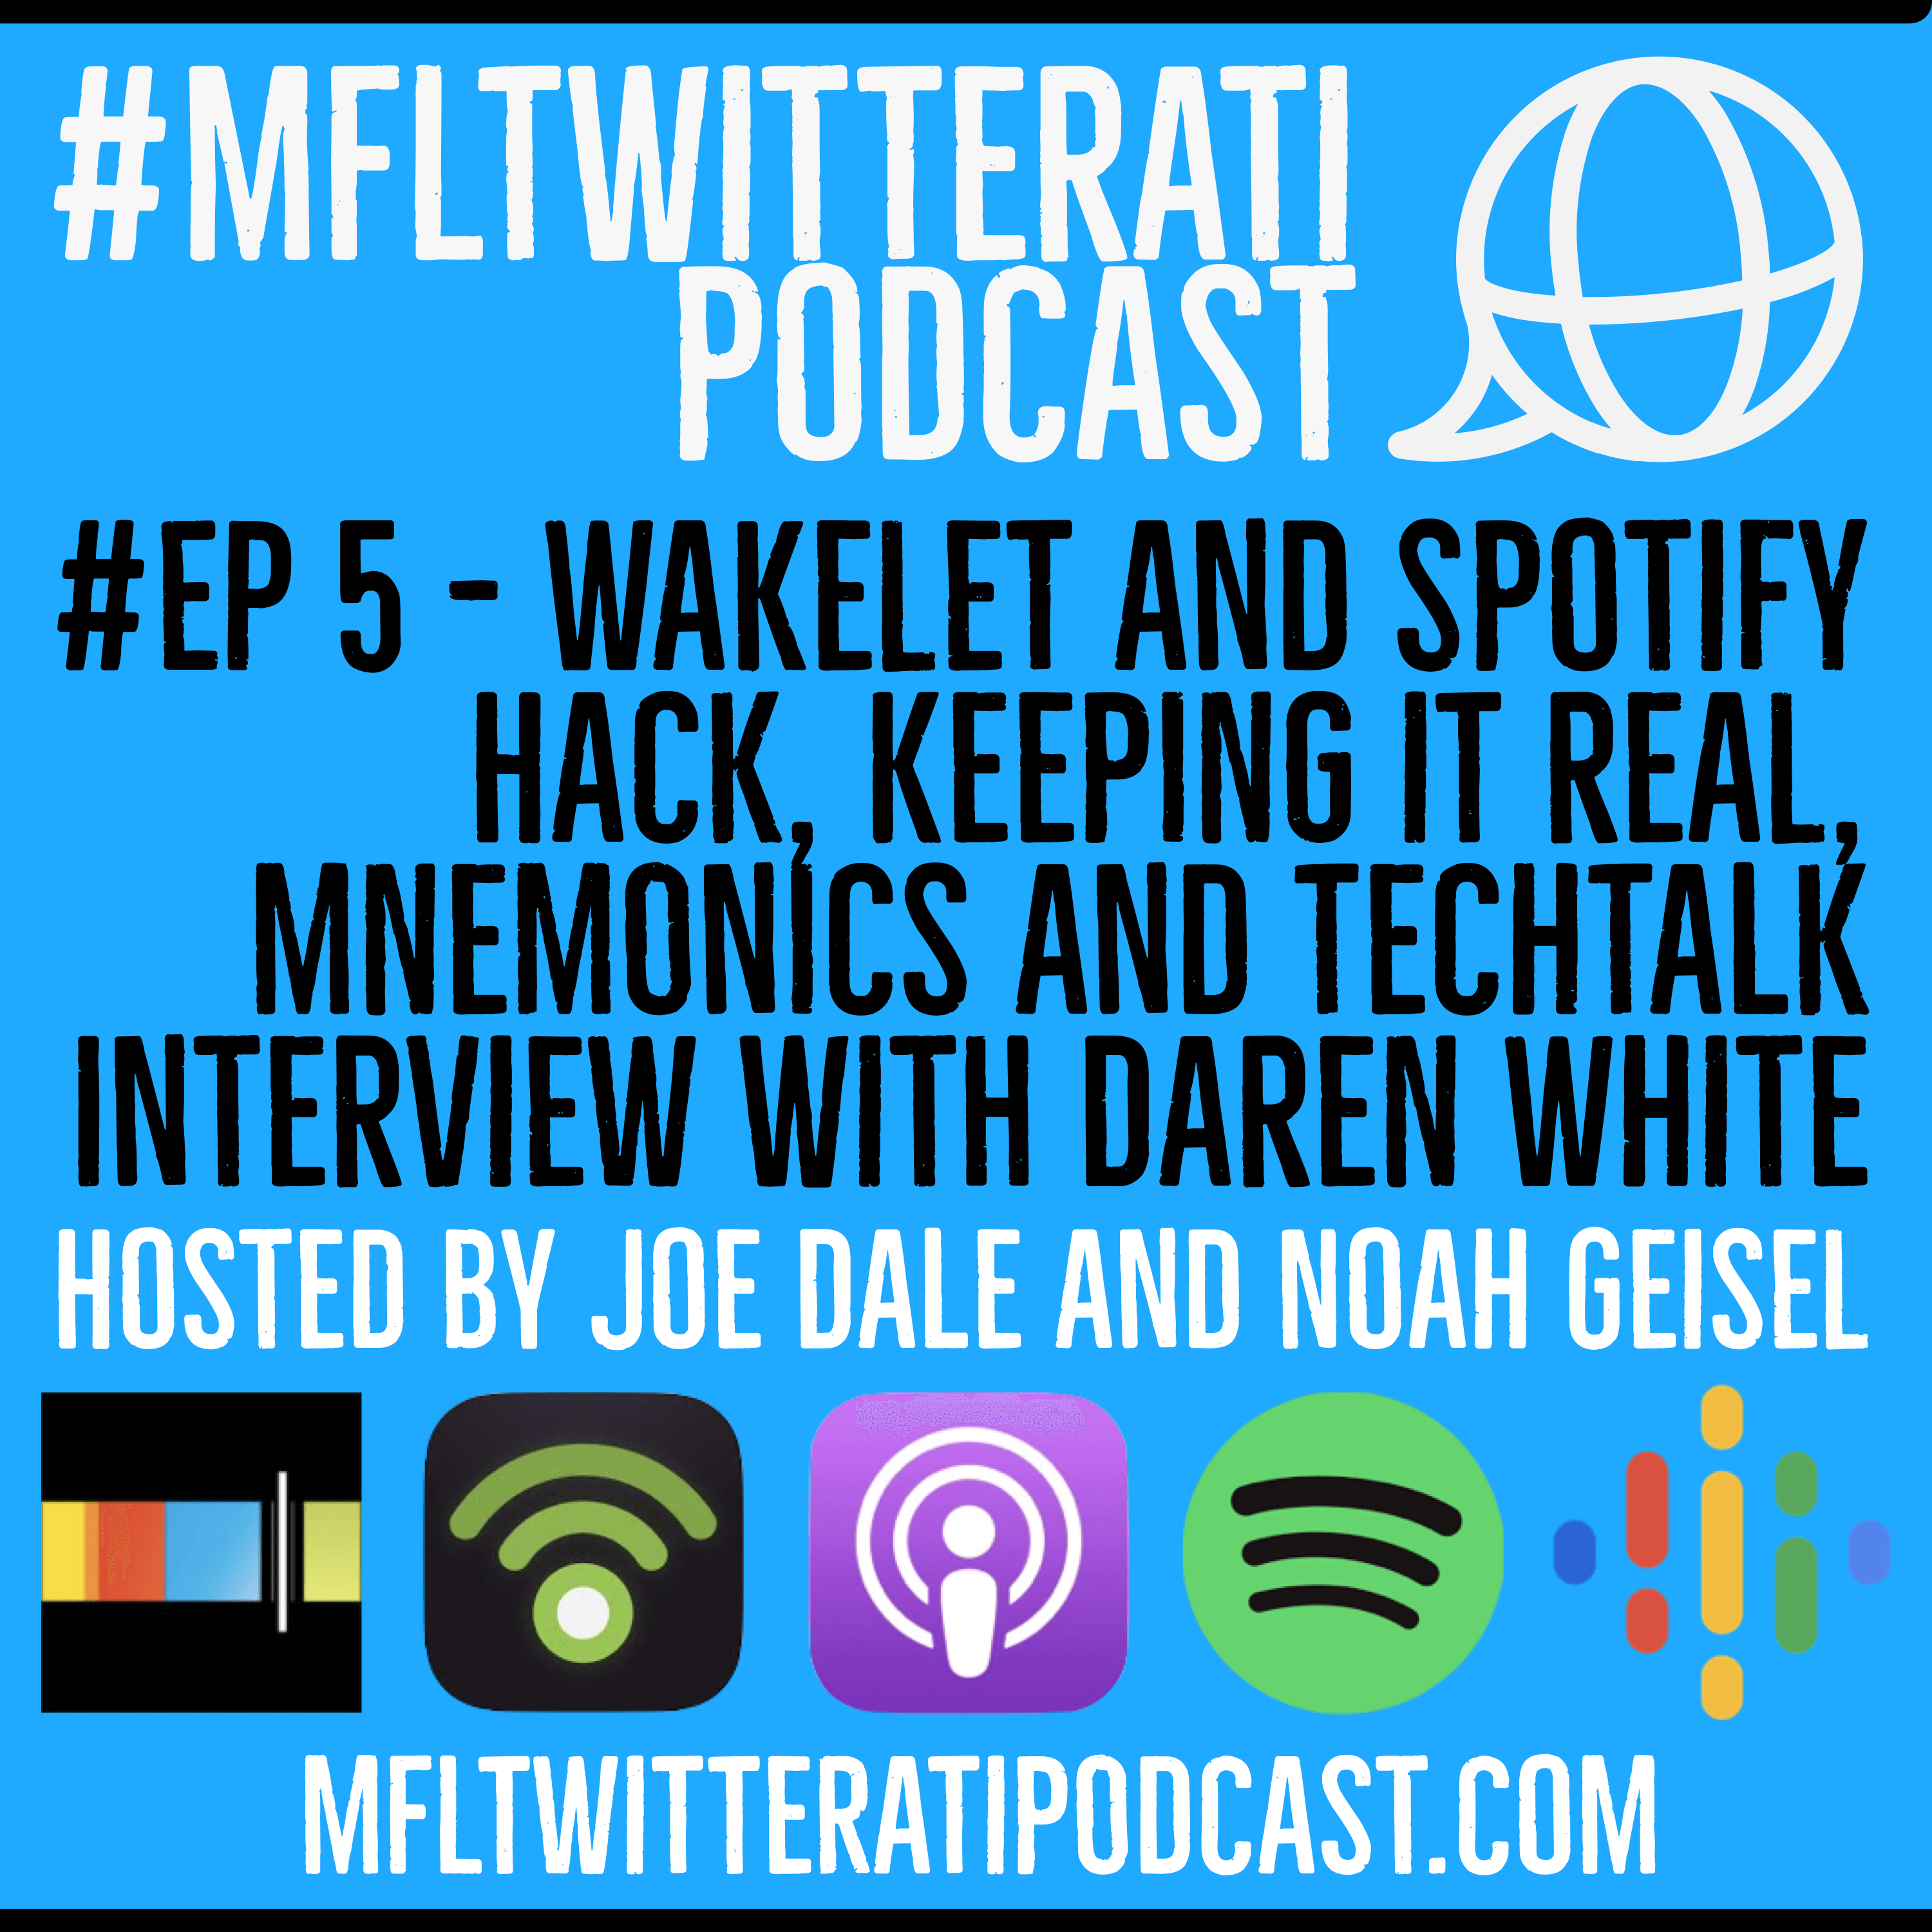 #EP 5 - Wakelet and Spotify Hack, Keeping it real, Mnemonics and TechTalk interview with Daren White